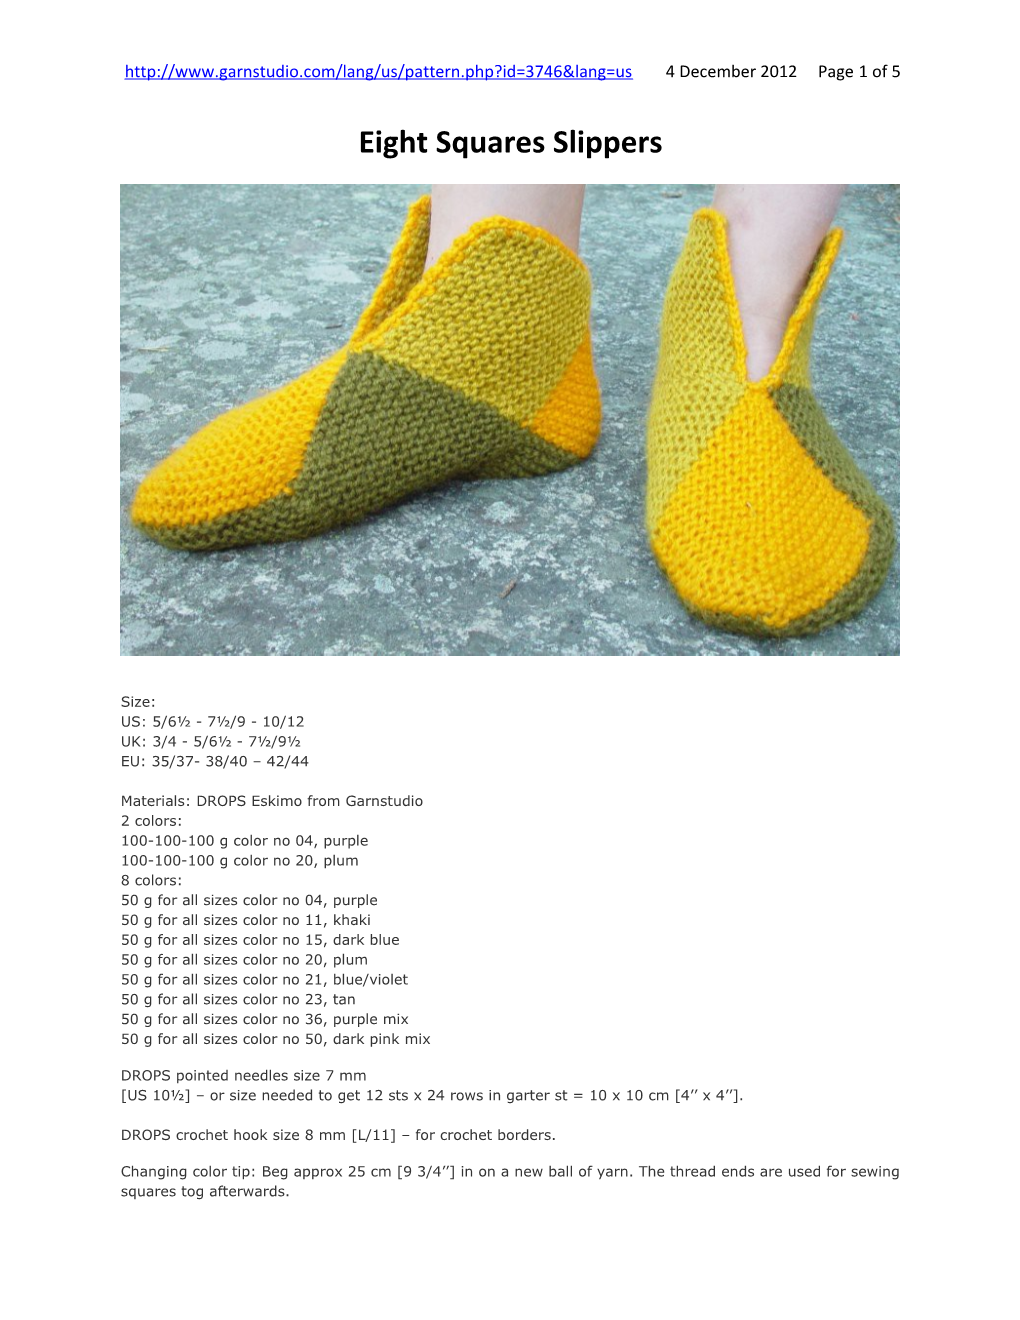 Eight Squares Slippers